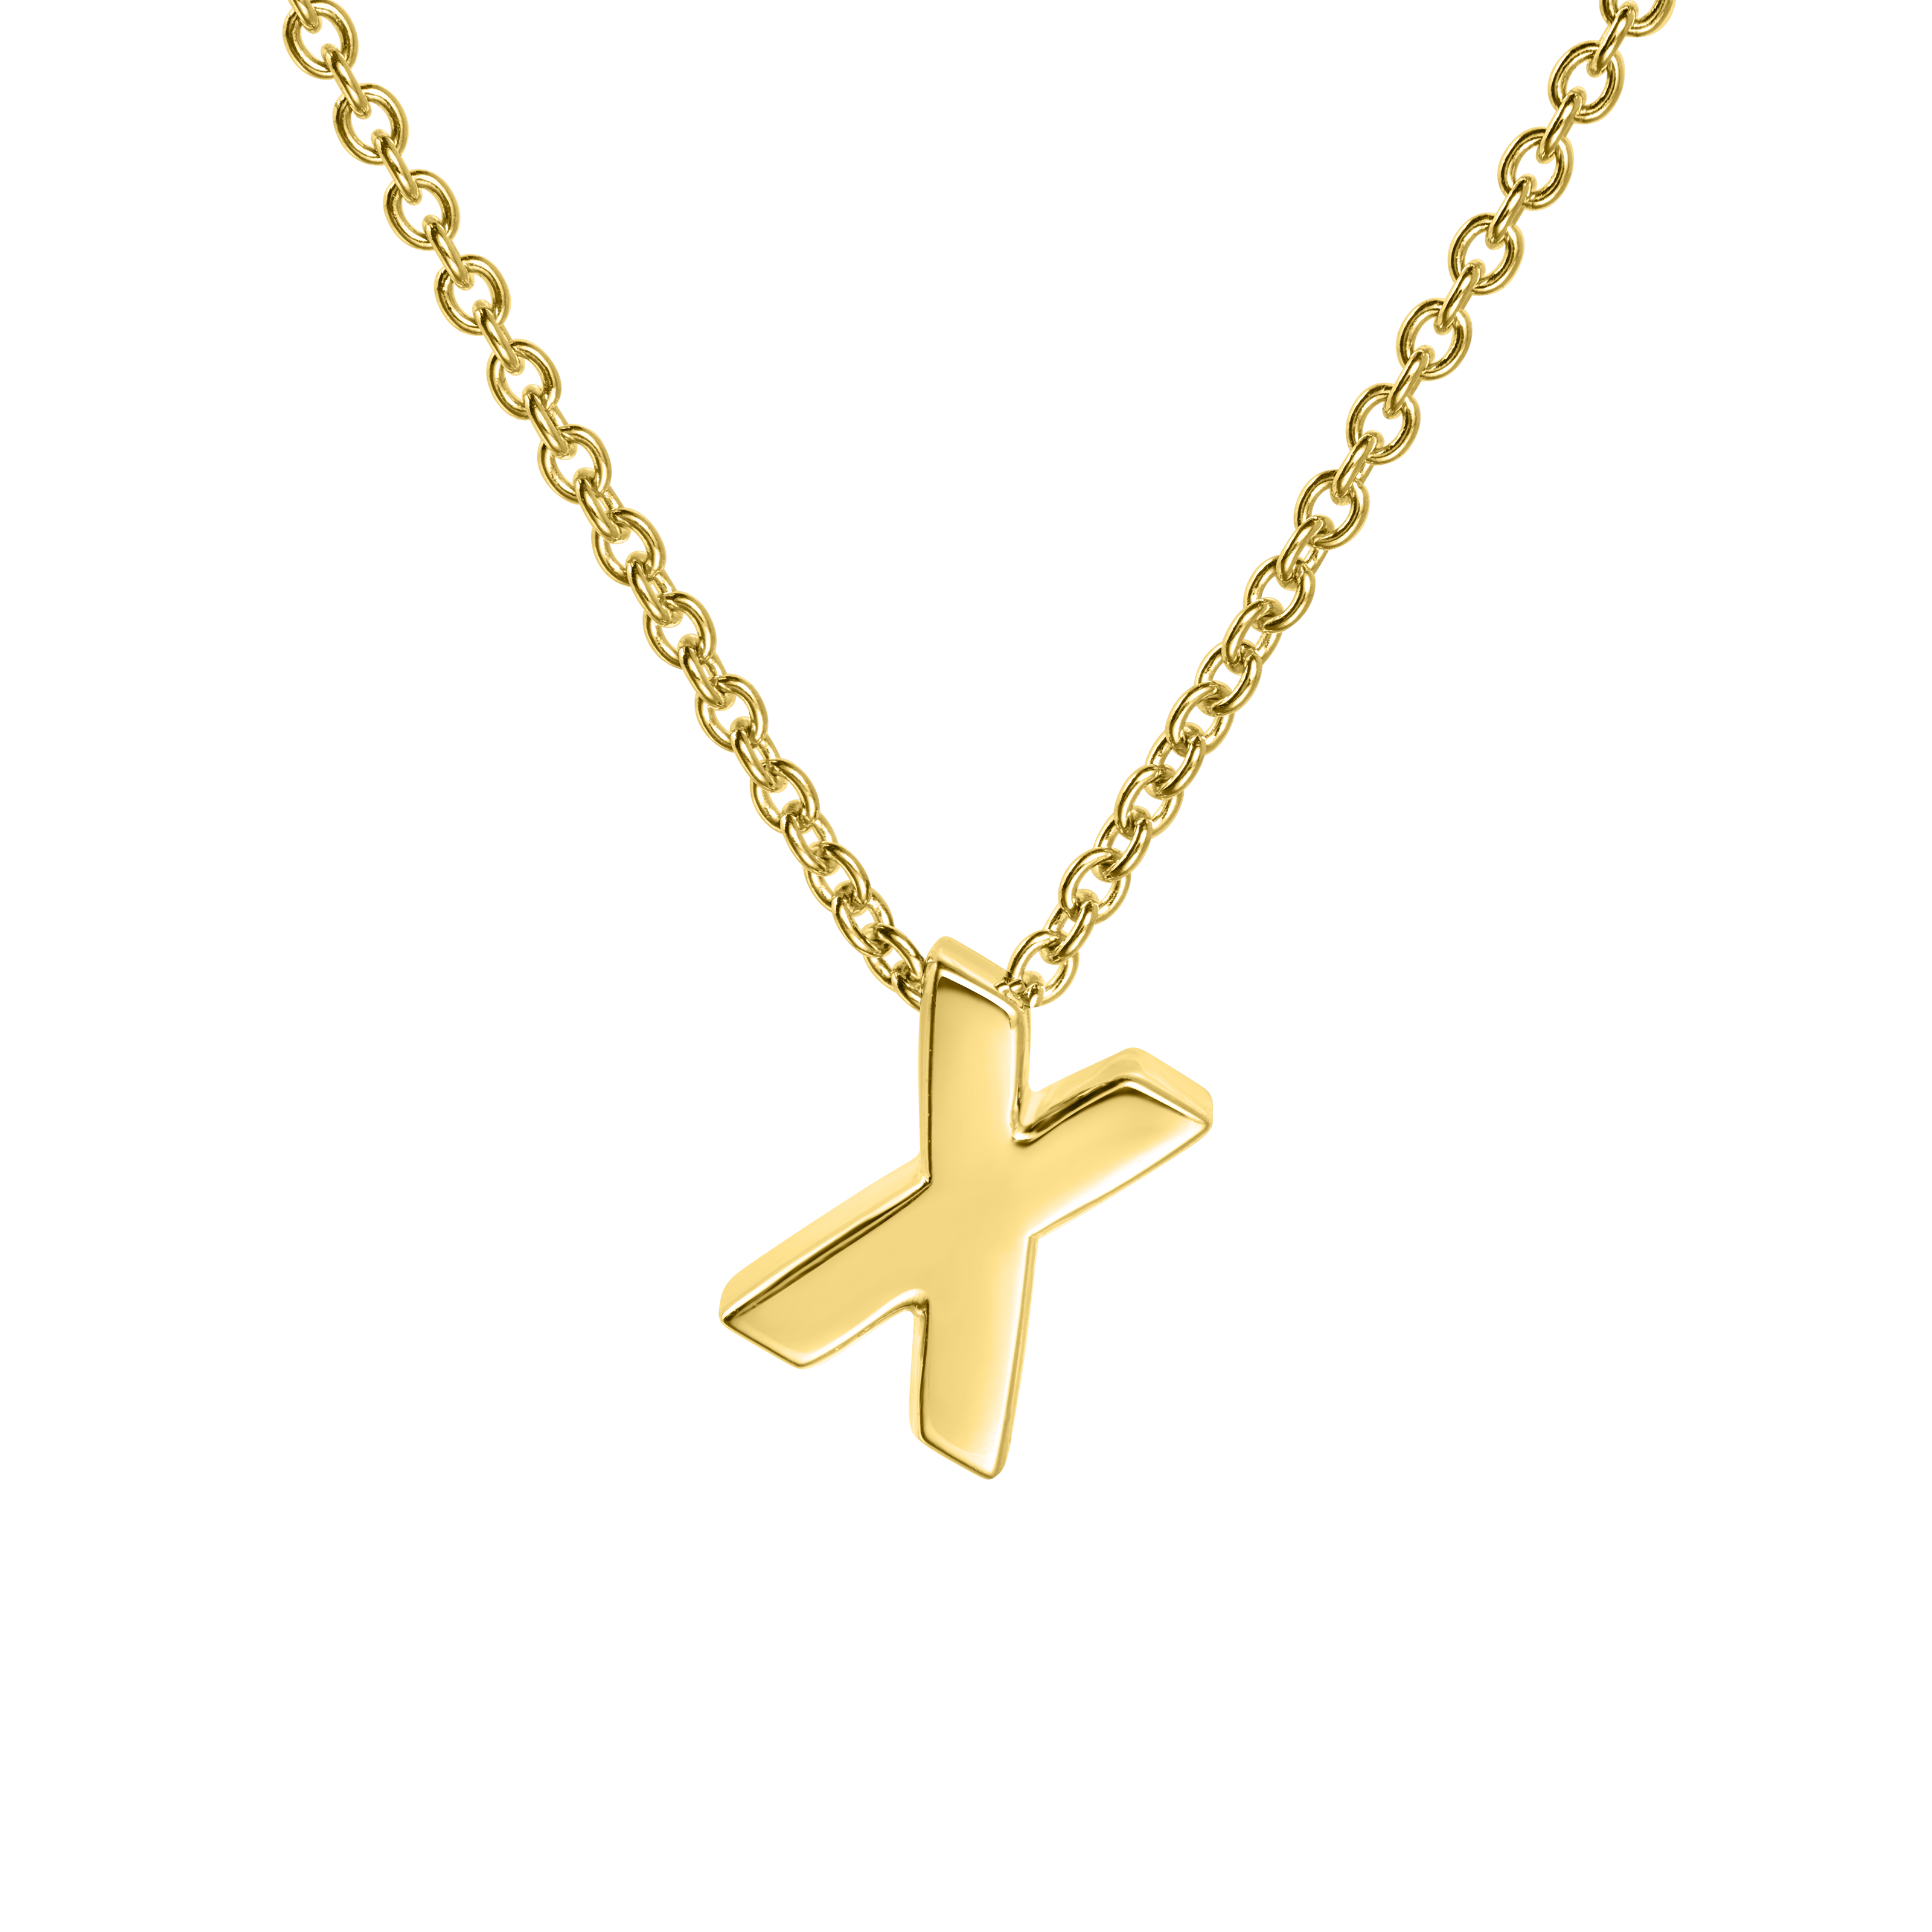 Malcolm X Small Square Medallion Necklace | Sewit Sium